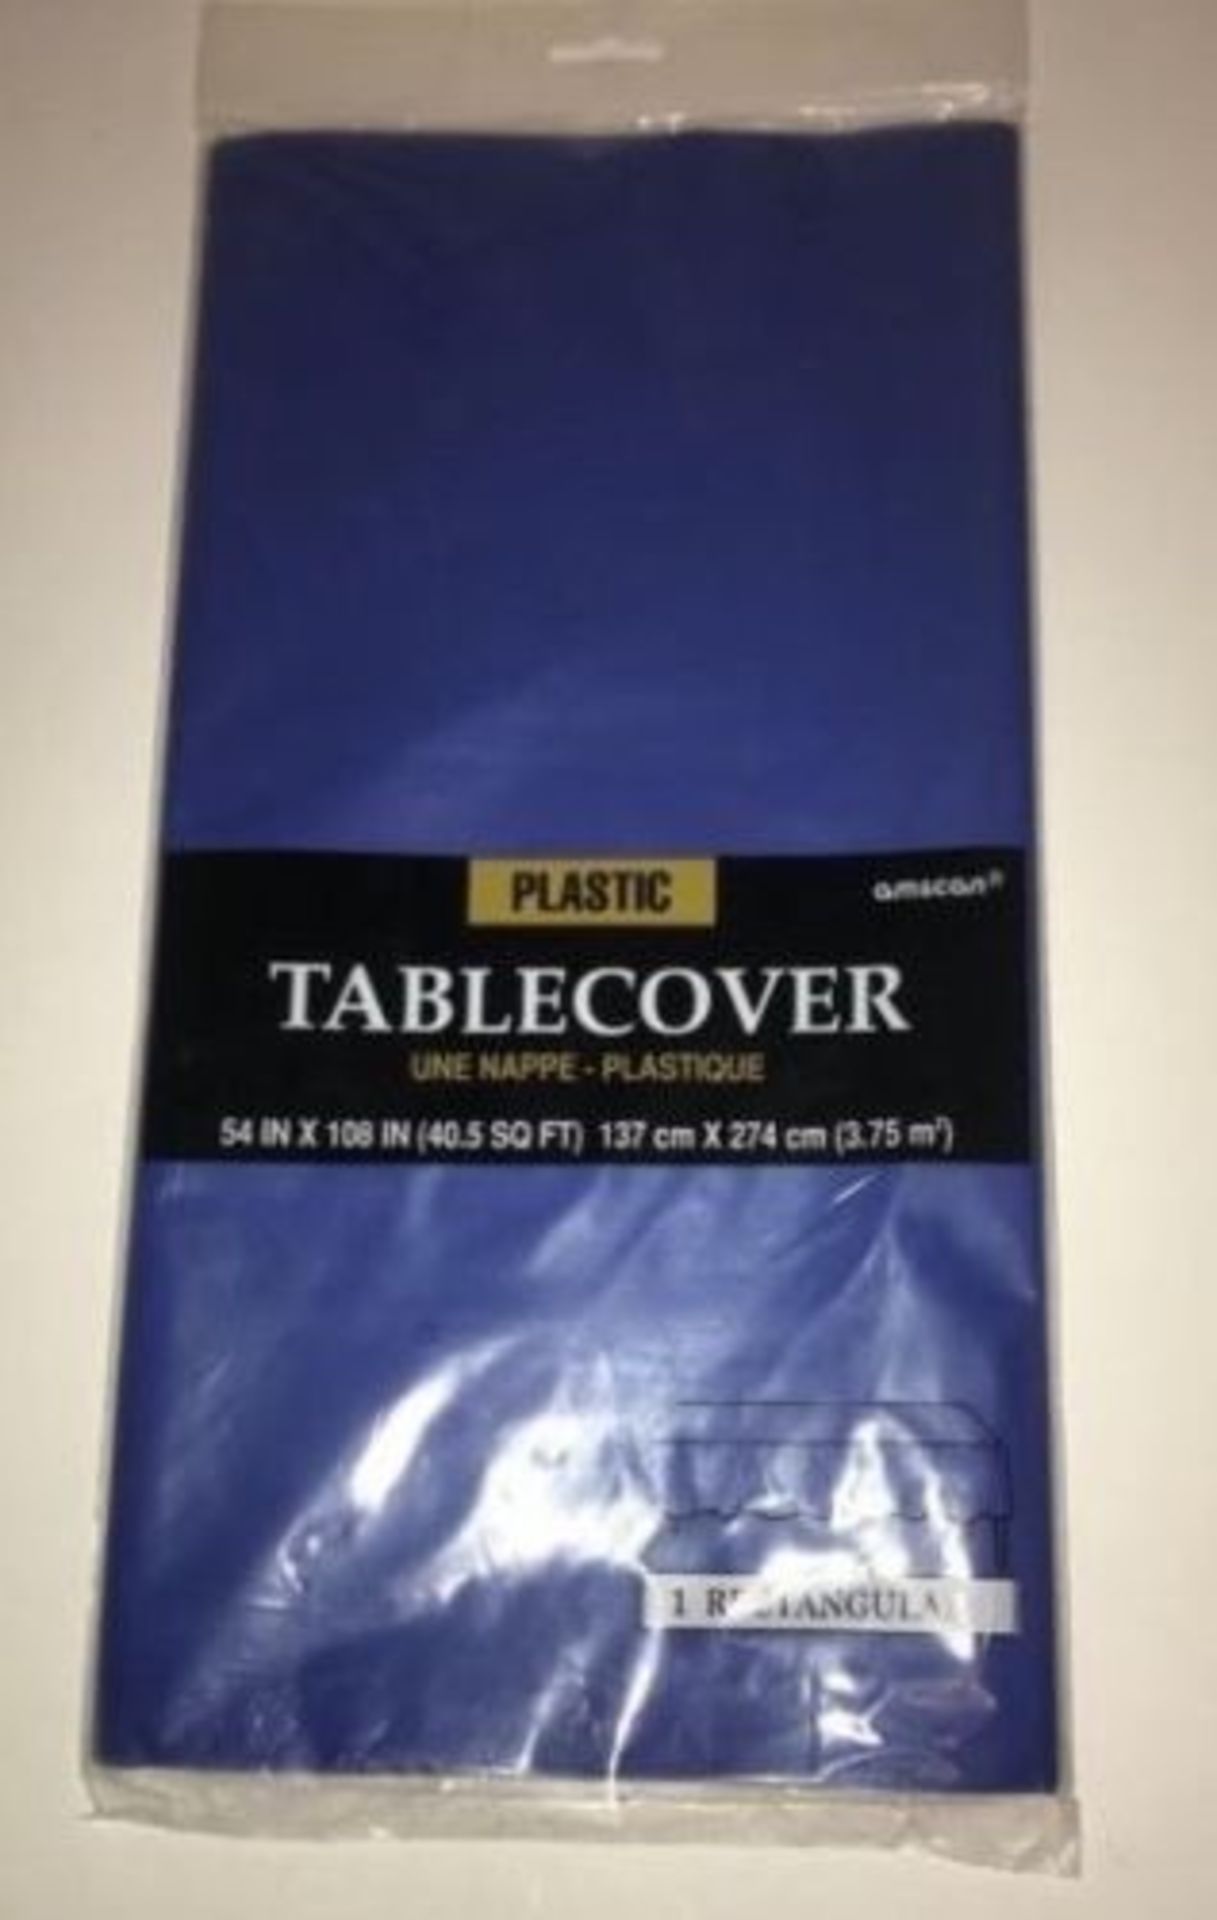 LOT OF 23 Amscan Plastic Table Cover 54" x 108" (40.5 Sq Ft) Plastic Royal Blue